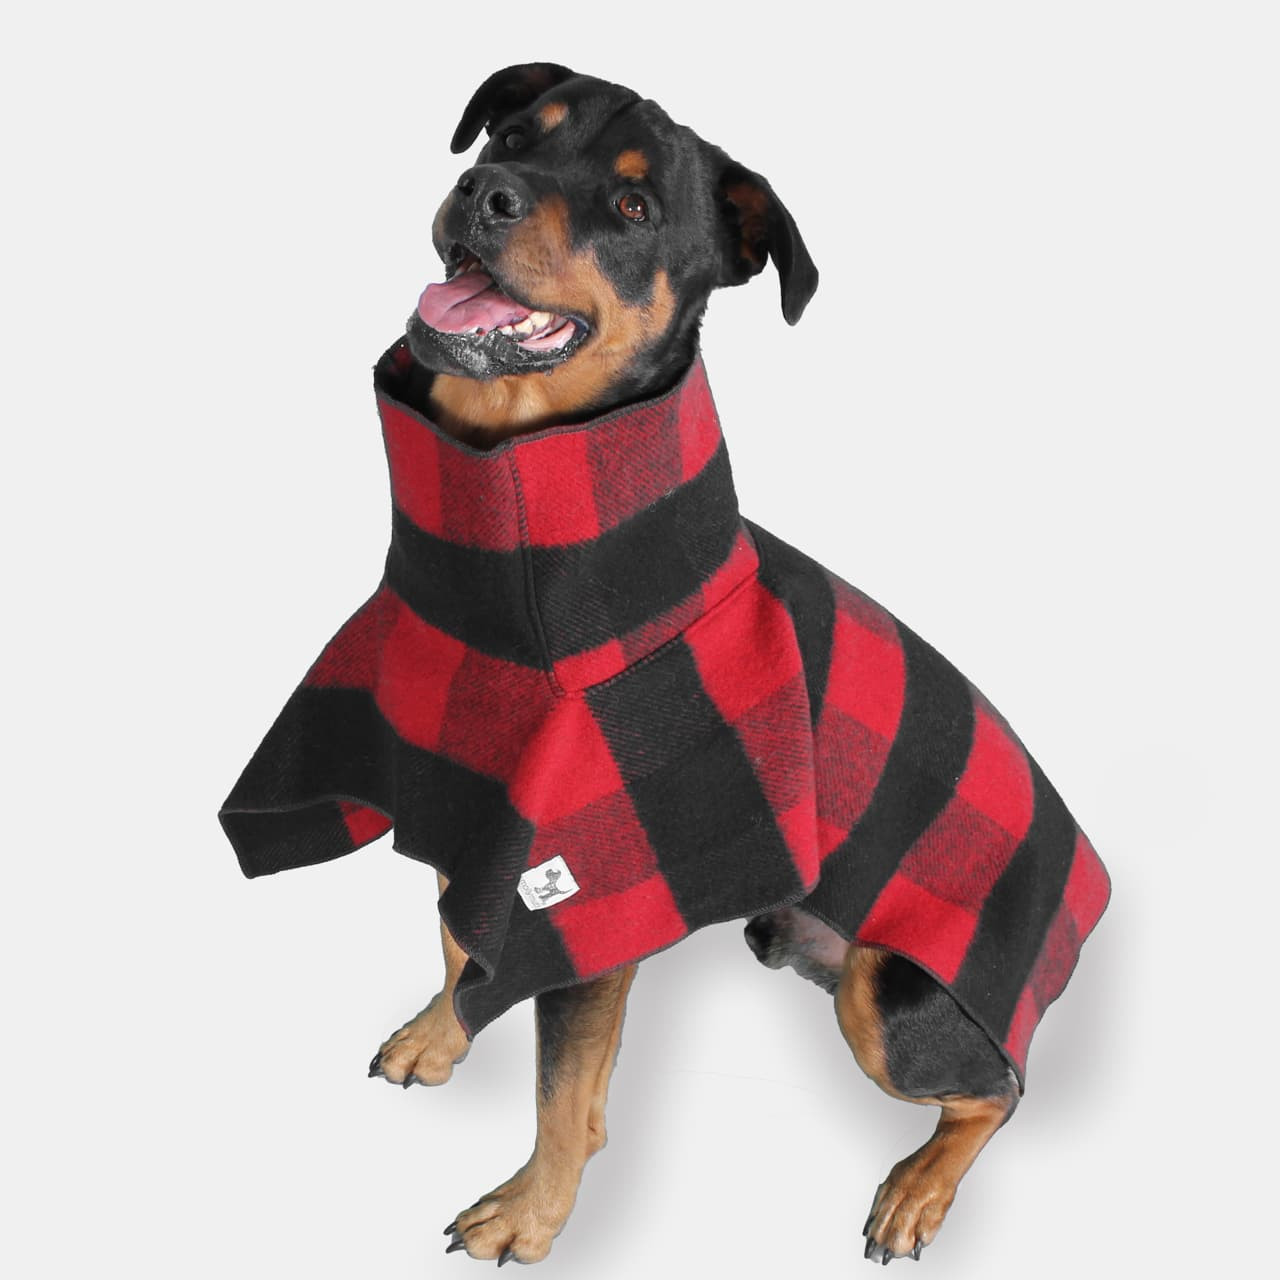 100% Wool Dog Capes, Winter Jackets for Dogs